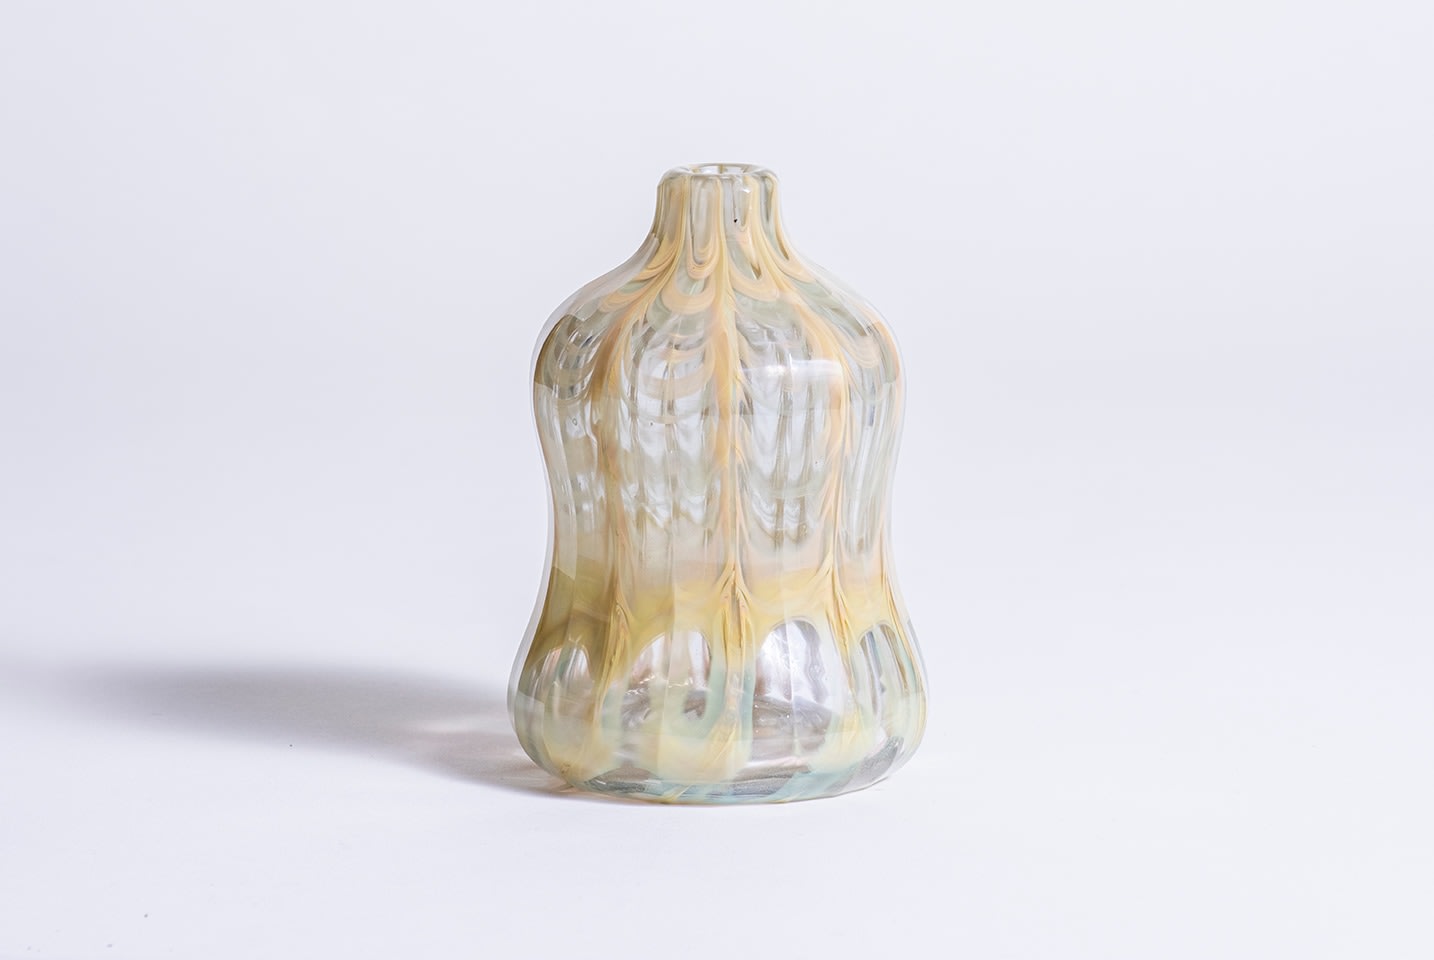 an early tiffany favrile glass paperweight agate vase, with internal decoration of agate-style stoneware inspired design in variegated creamy yellow encased within thick clear glass, the vase of waisted cylindrical form with thin neck